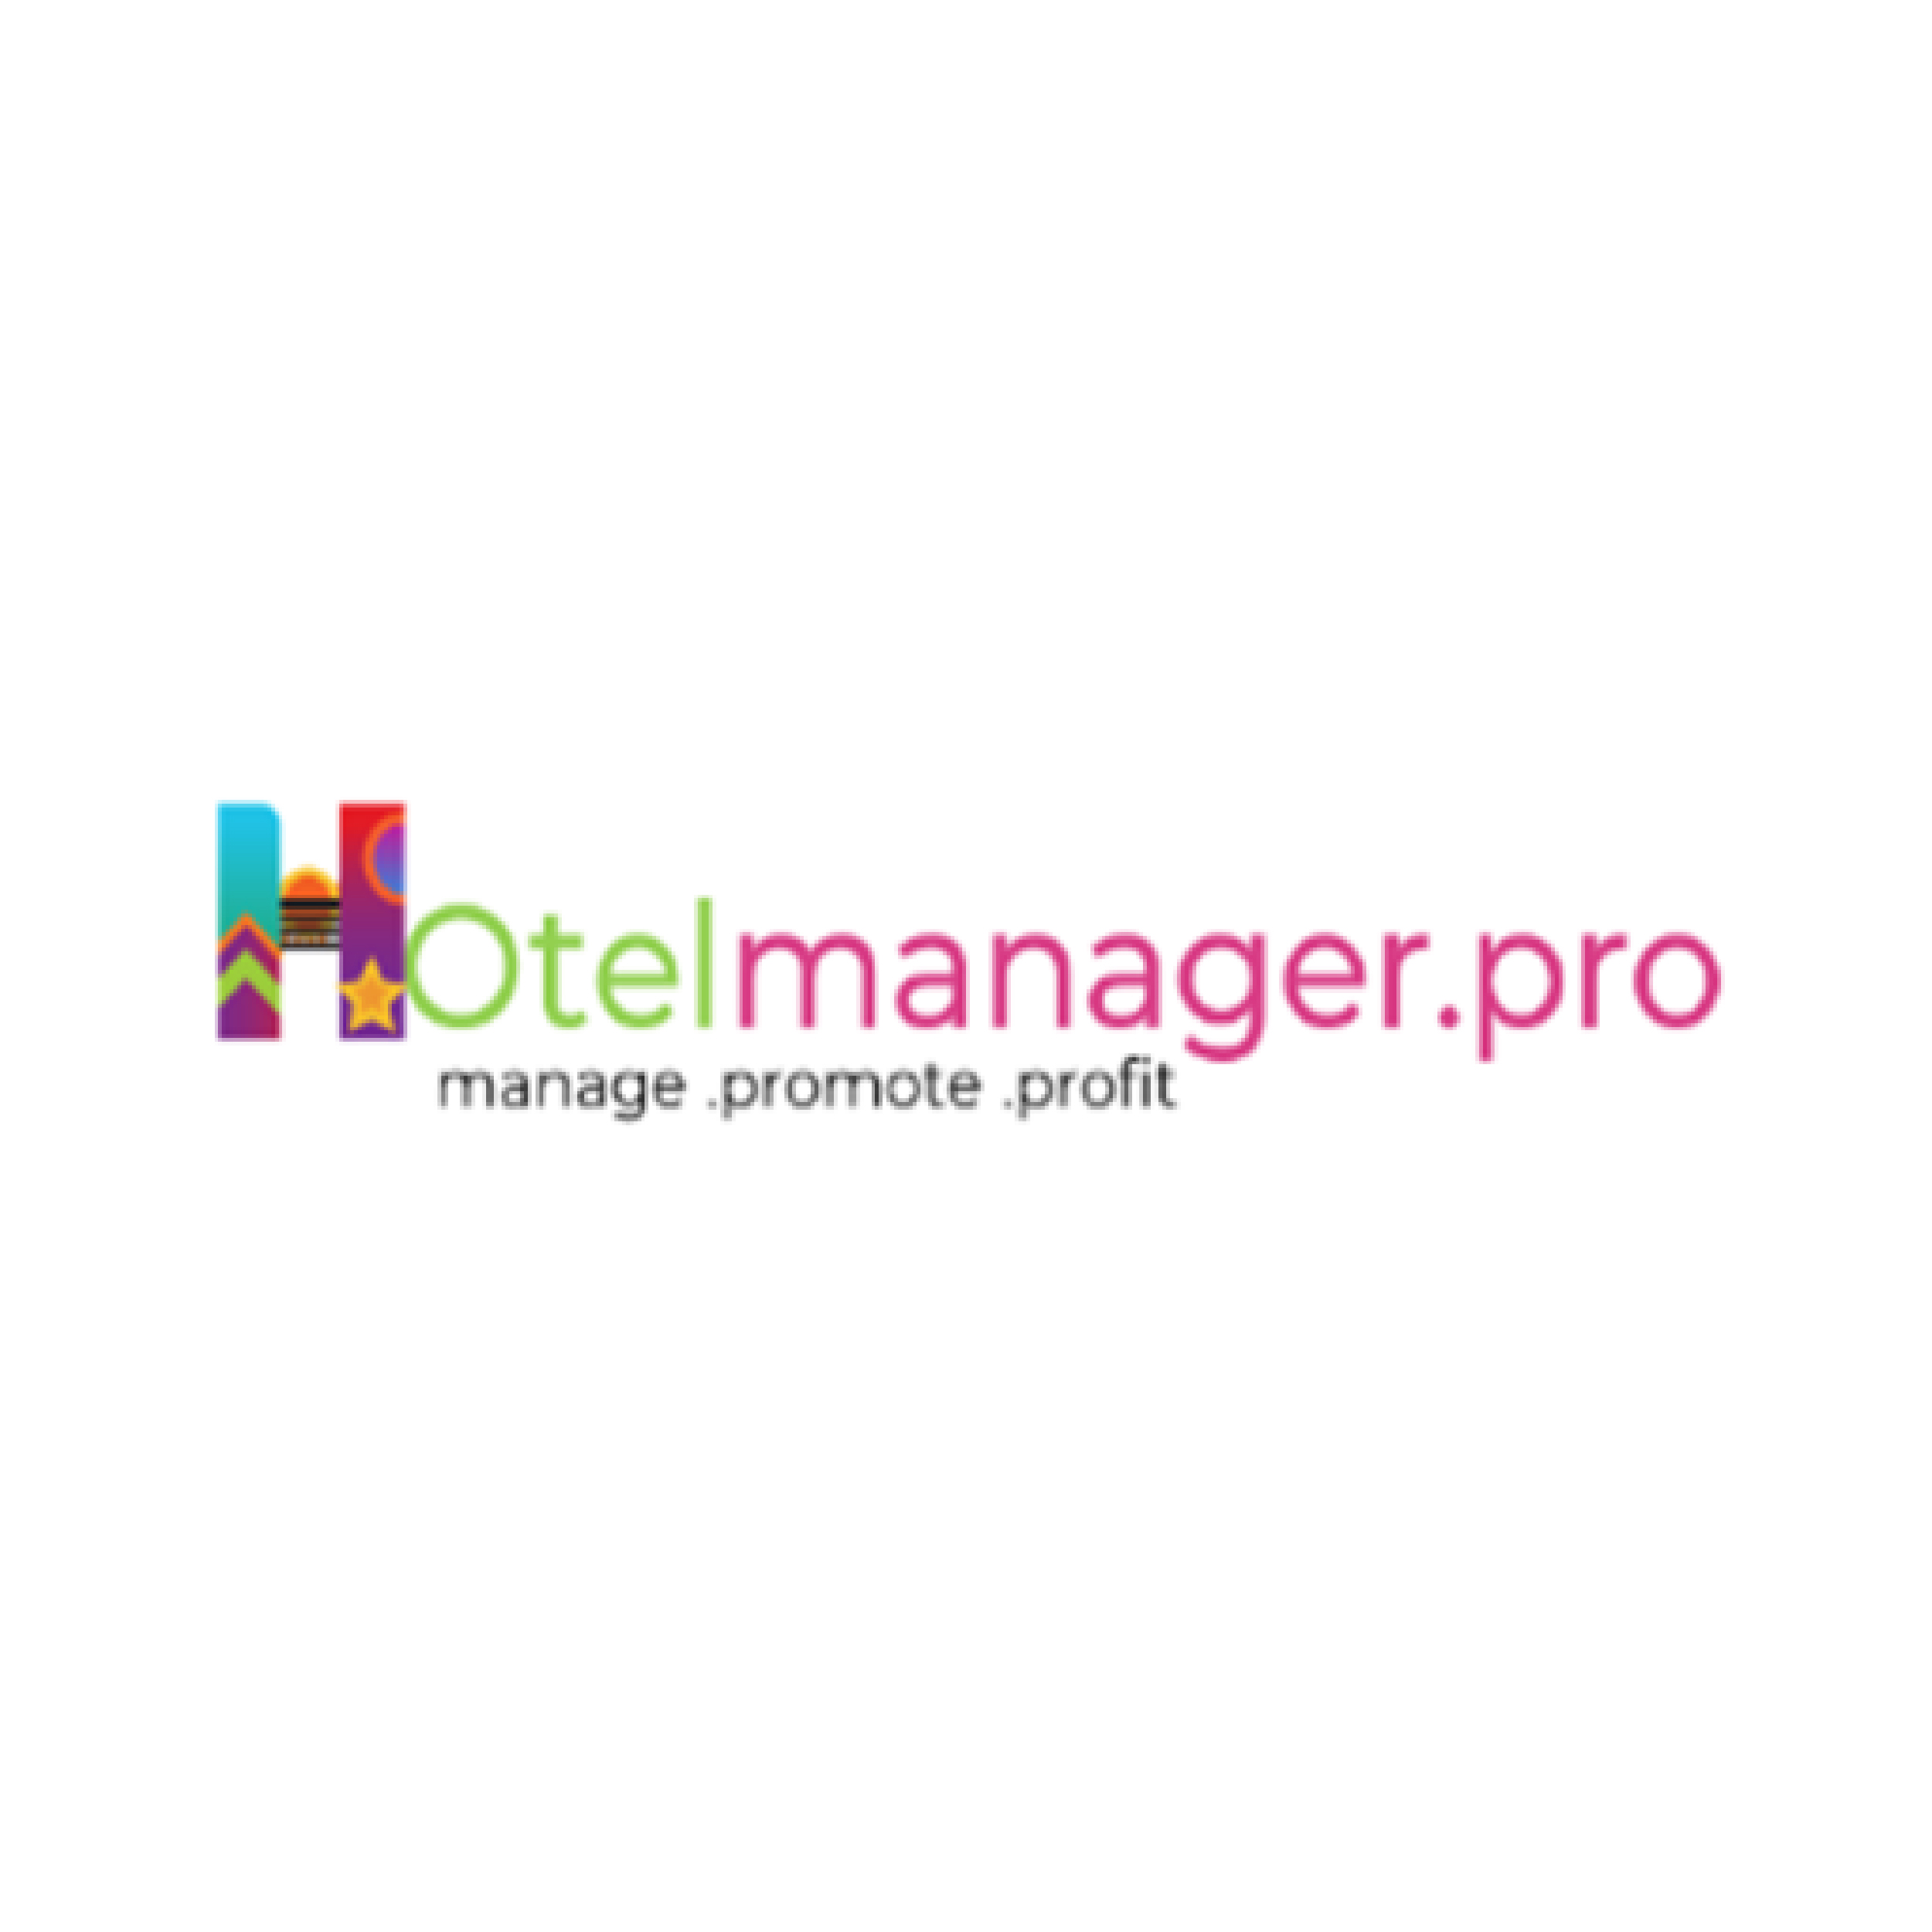 hotelmanager.pro